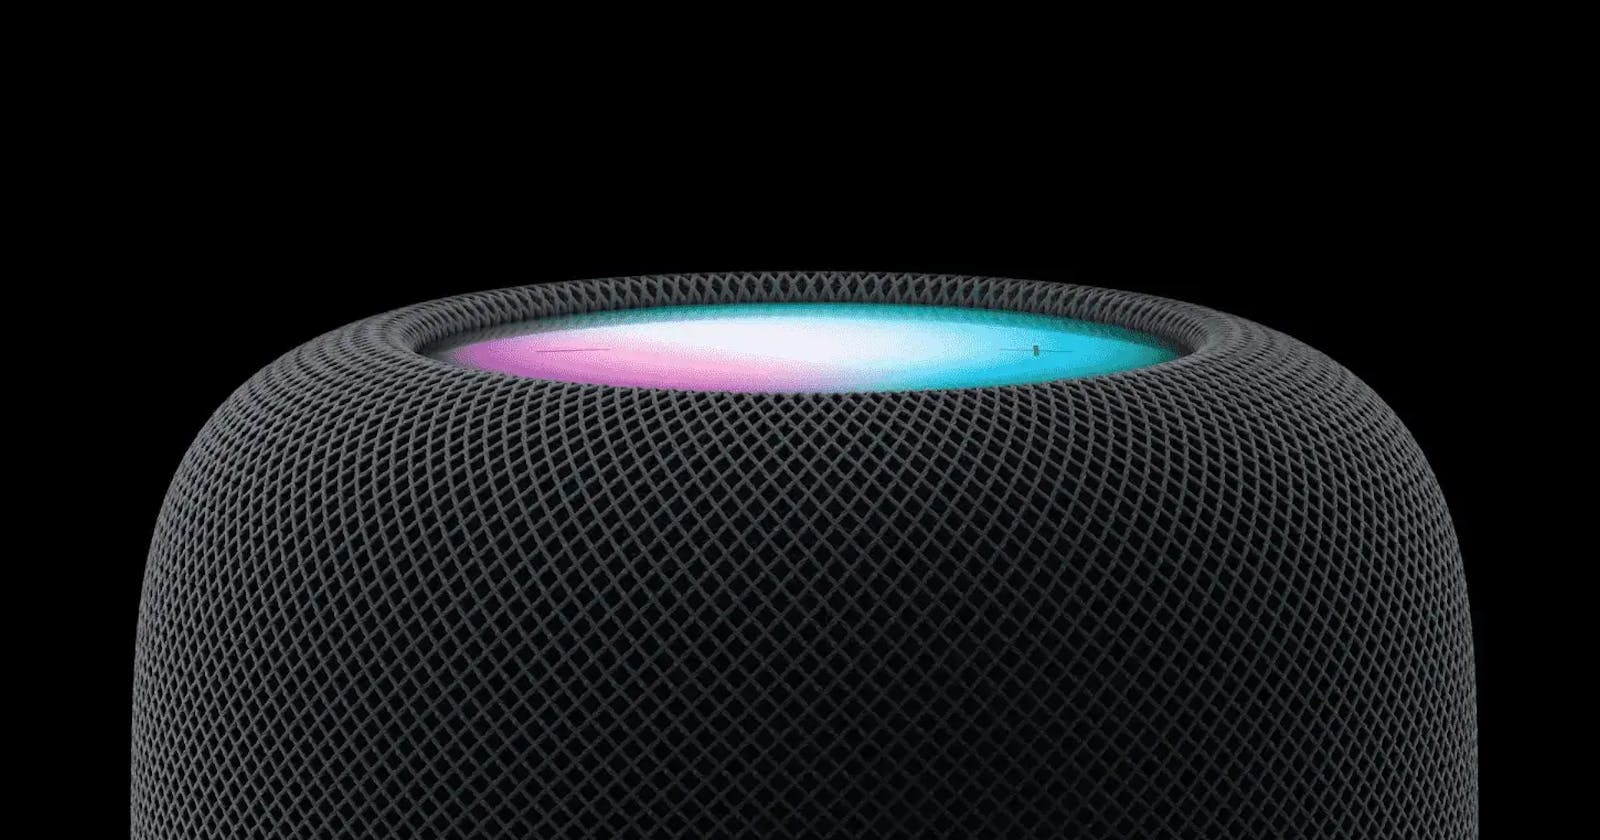 Apple Releases a New Full-Size HomePod